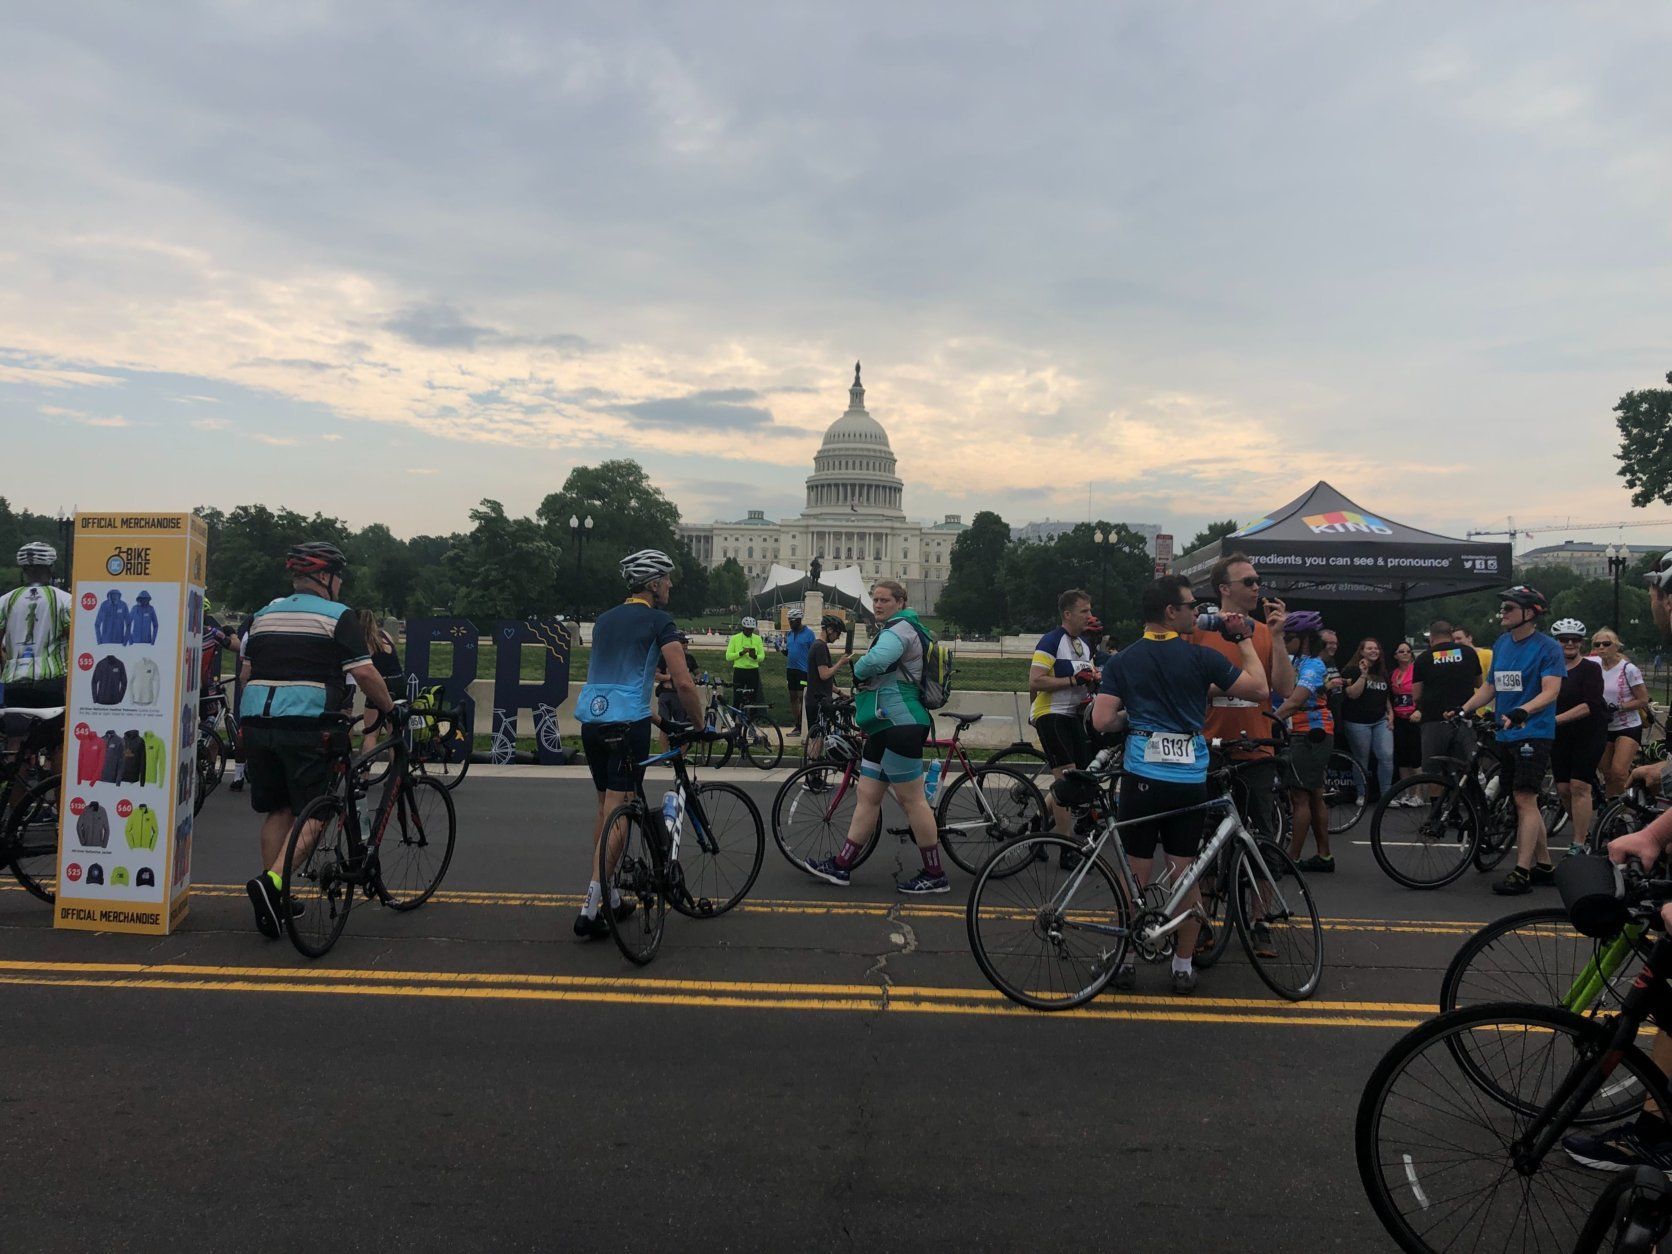 Bikers ride by the Capitol Building in a car-free D.C. as they take part in the D.C. Bike Ride. (WTOP/Melissa Howell)